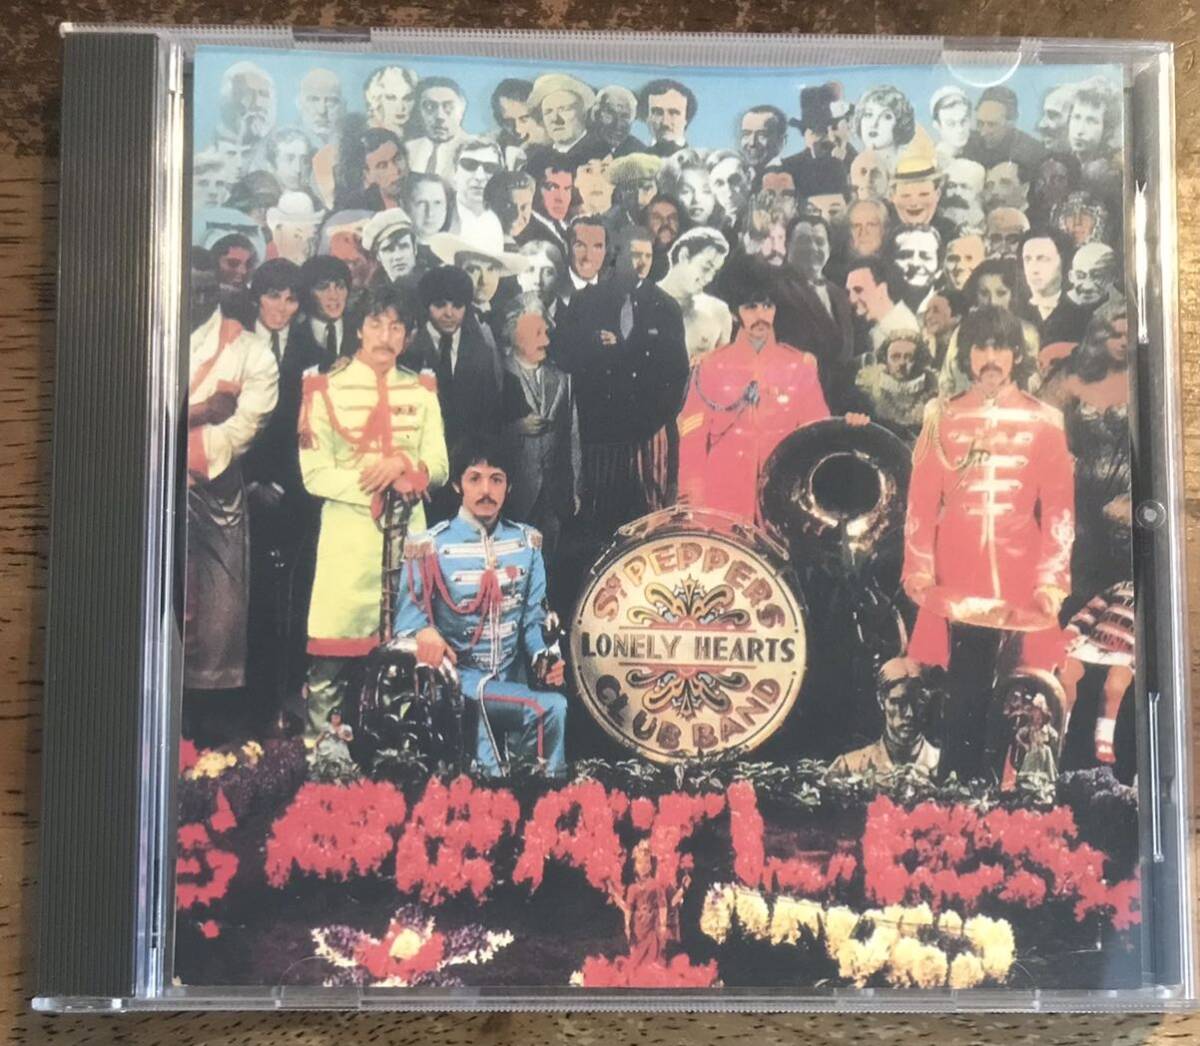 The Beatles / ビートルズ / 1967 / 1CD / pressed CD / Studio Outtakes & Sessions 1967 / 1967年アウトテイク&セッション音源集 / プレ_画像2